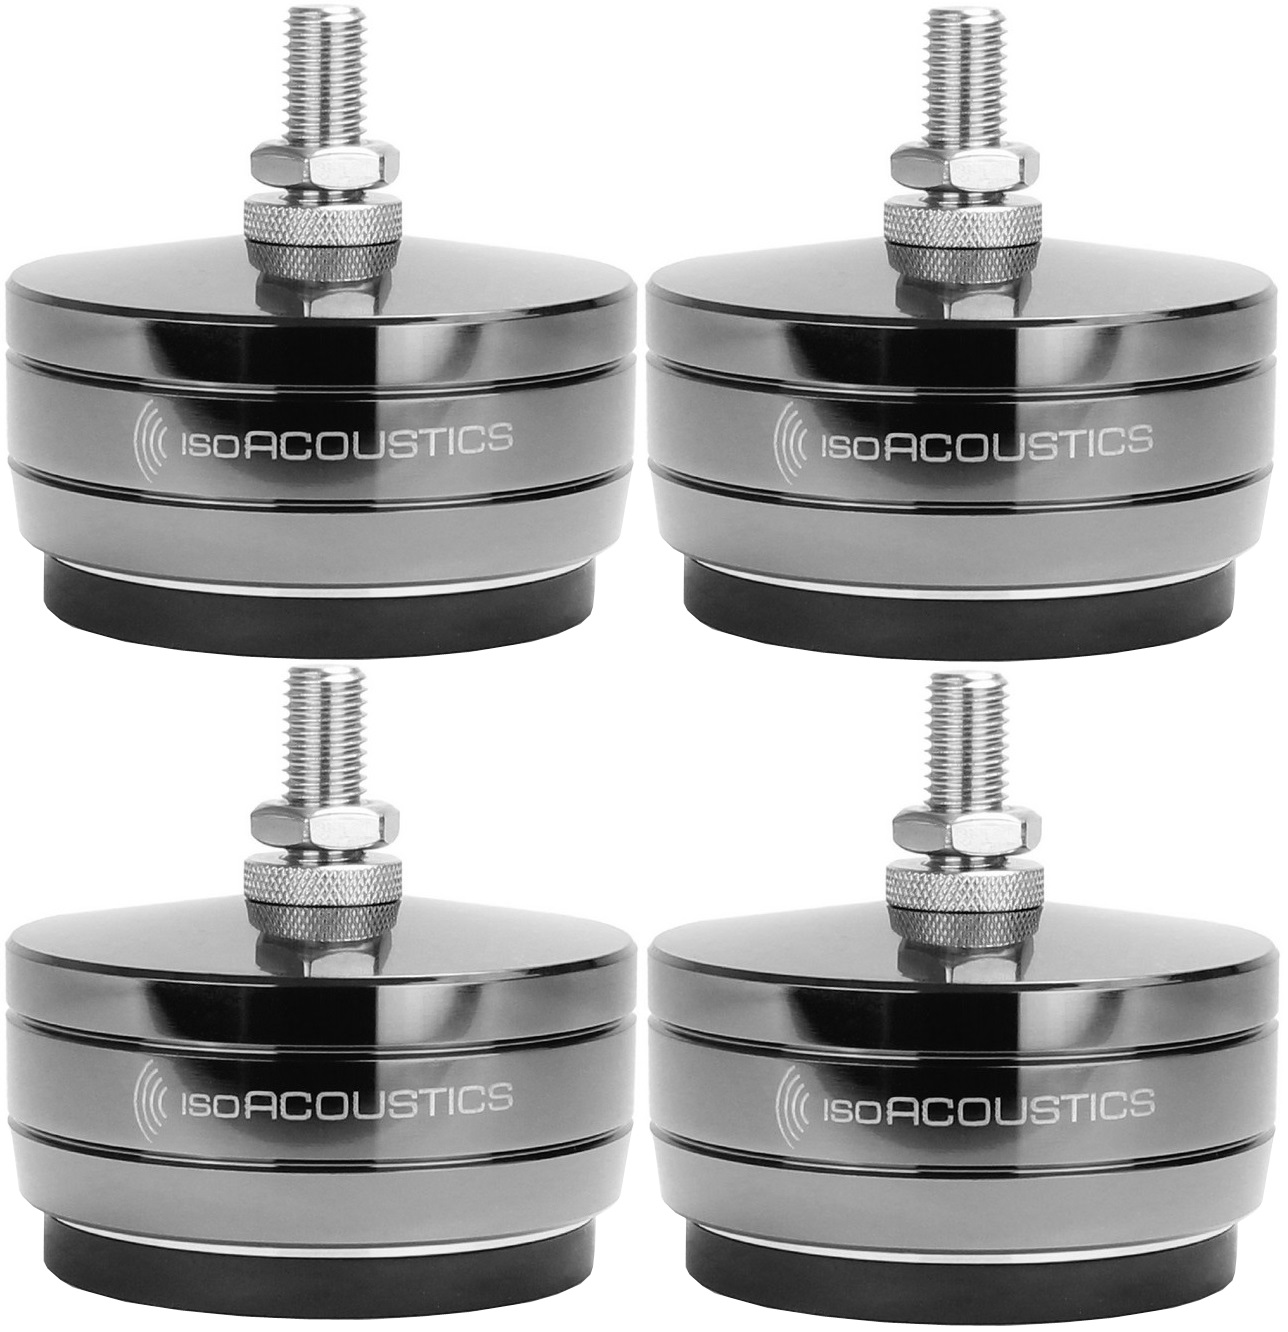 IsoAcoustics GAIA TITAN-CRONOS Stainless-Steel Speaker Isolation Feet/Stands (4-Pack)